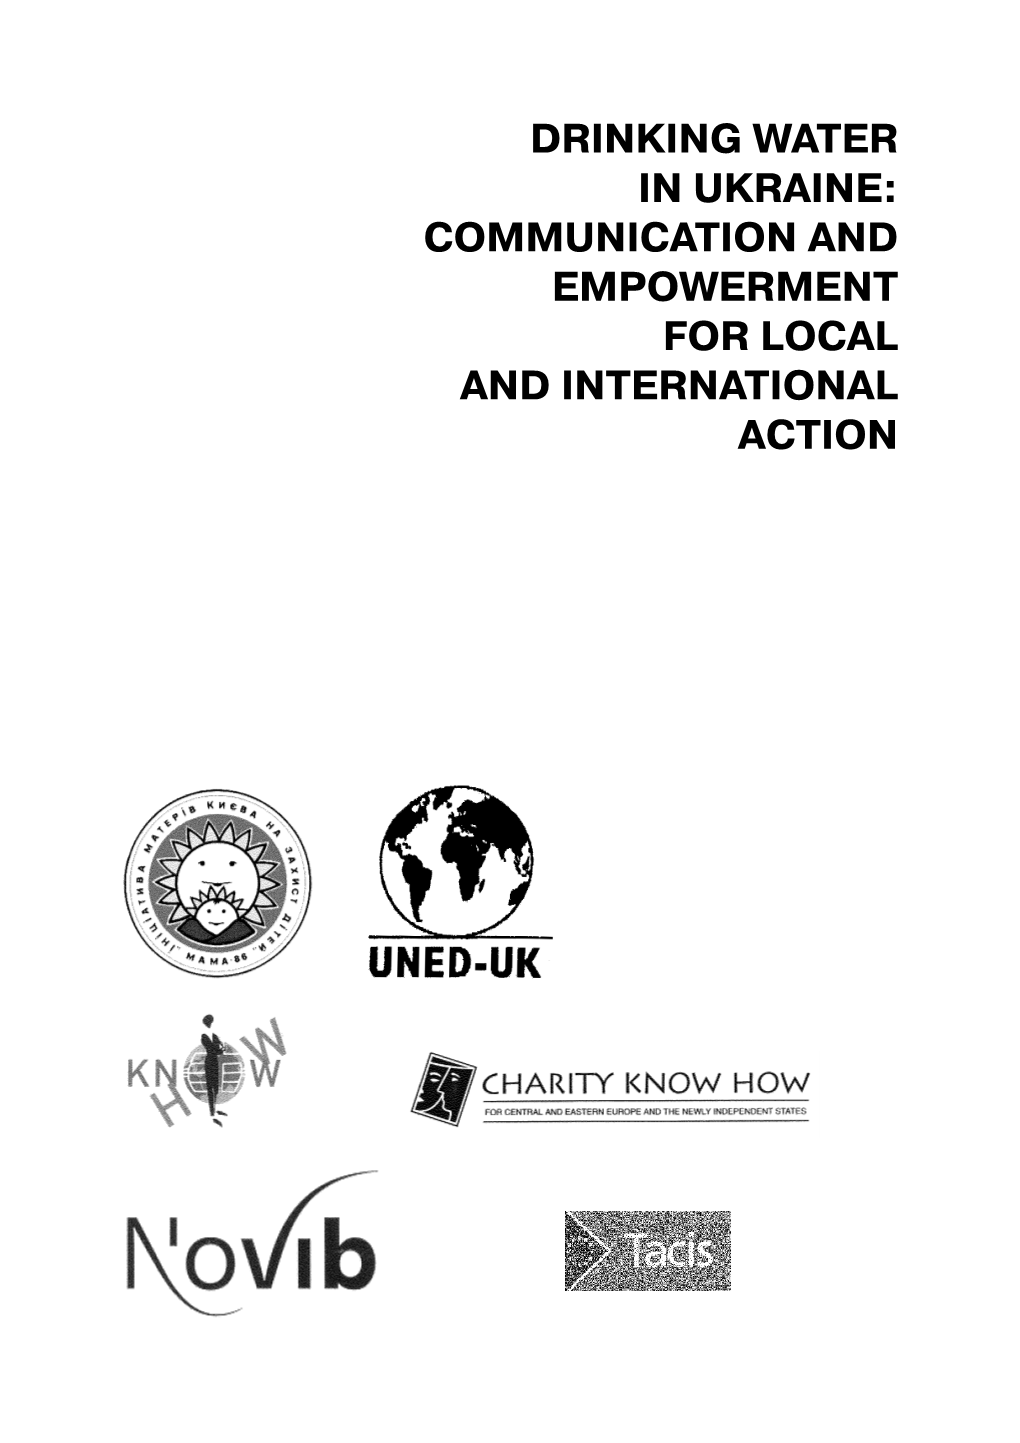 DRINKING WATER in UKRAINE: COMMUNICATION and EMPOWERMENT for LOCAL and INTERNATIONAL ACTION This Case-Study Is a Joint Initiative Between MAMA-86 and UNED-UK